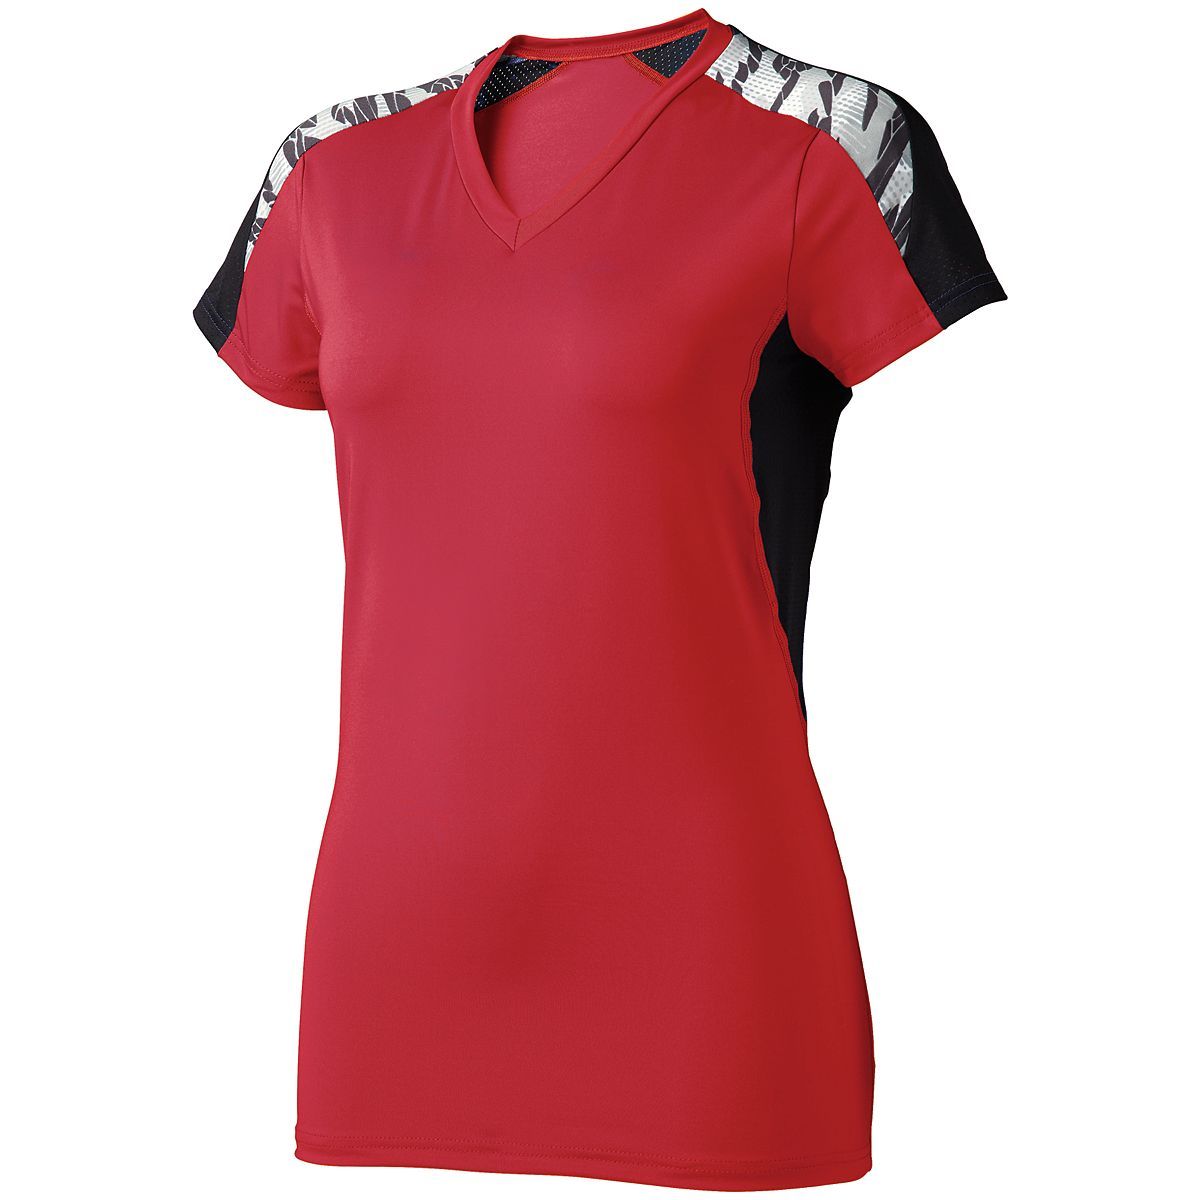 High 5 Ladies Atomic Short Sleeve Jersey in Scarlet/Fragment Print/Black  -Part of the Ladies, Ladies-Jersey, High5-Products, Volleyball, Shirts product lines at KanaleyCreations.com